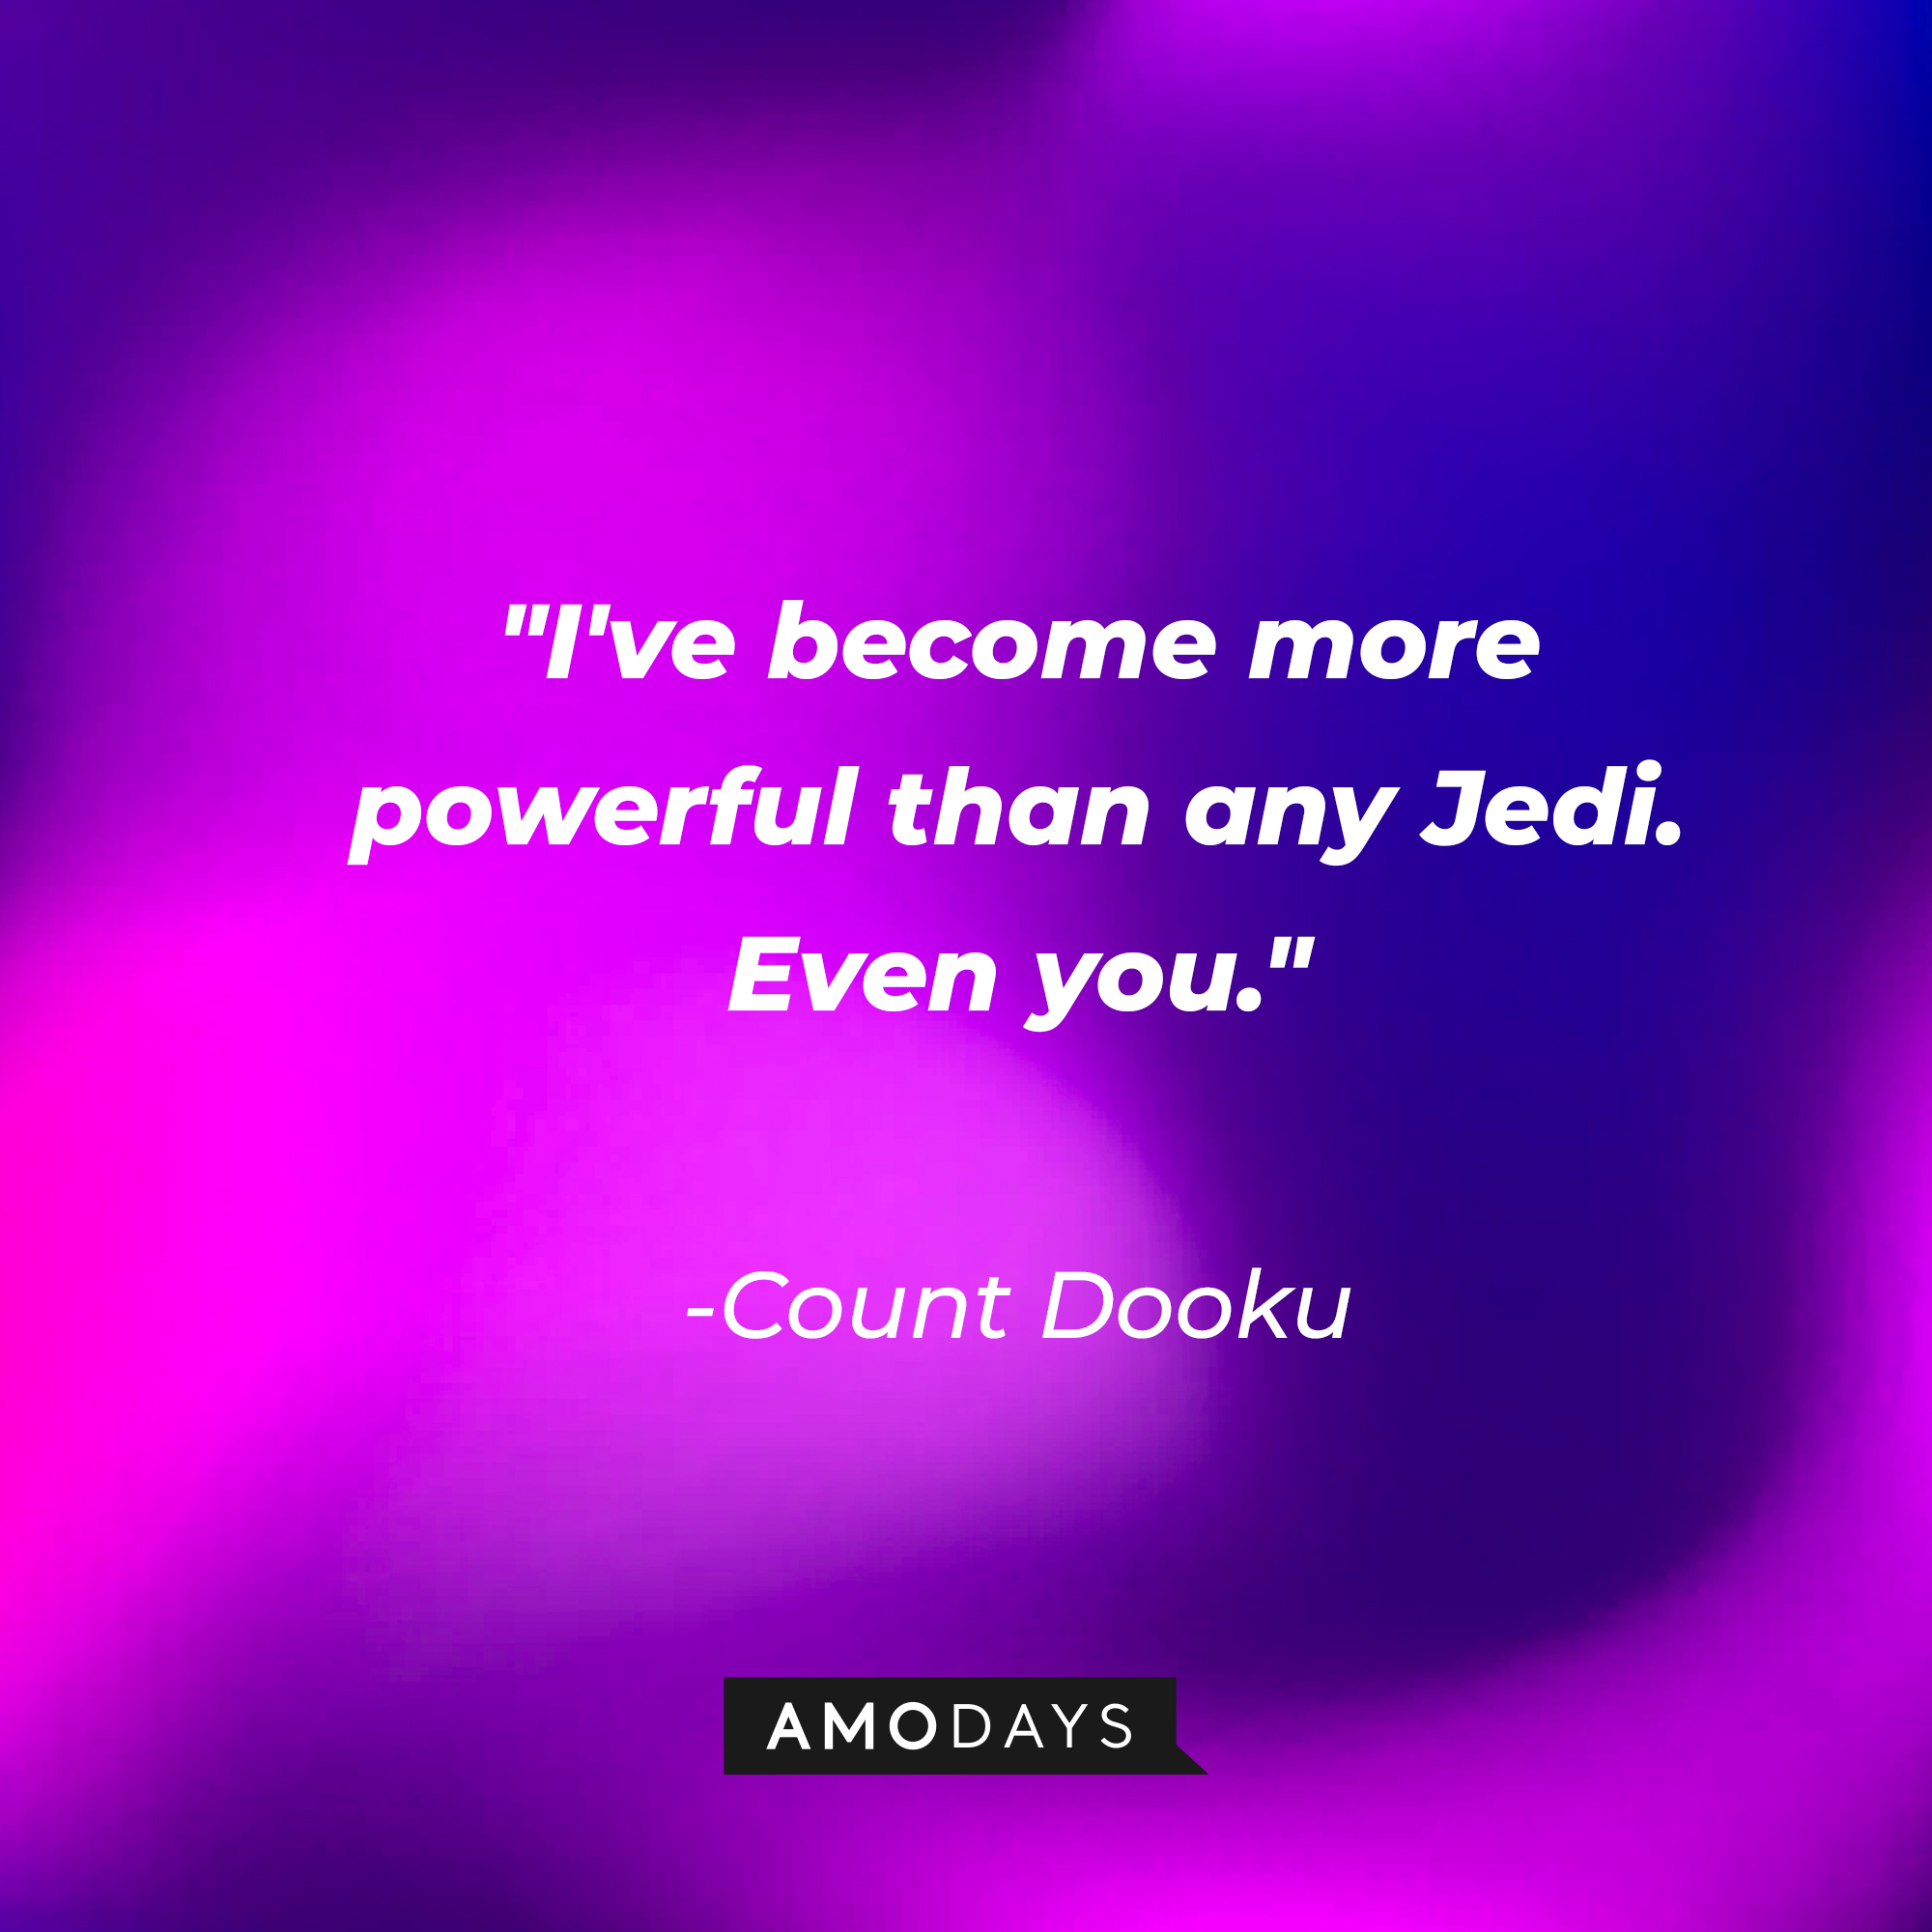 Count Dooku's quote: "I've become more powerful than any Jedi. Even you." | Source: AmoDays